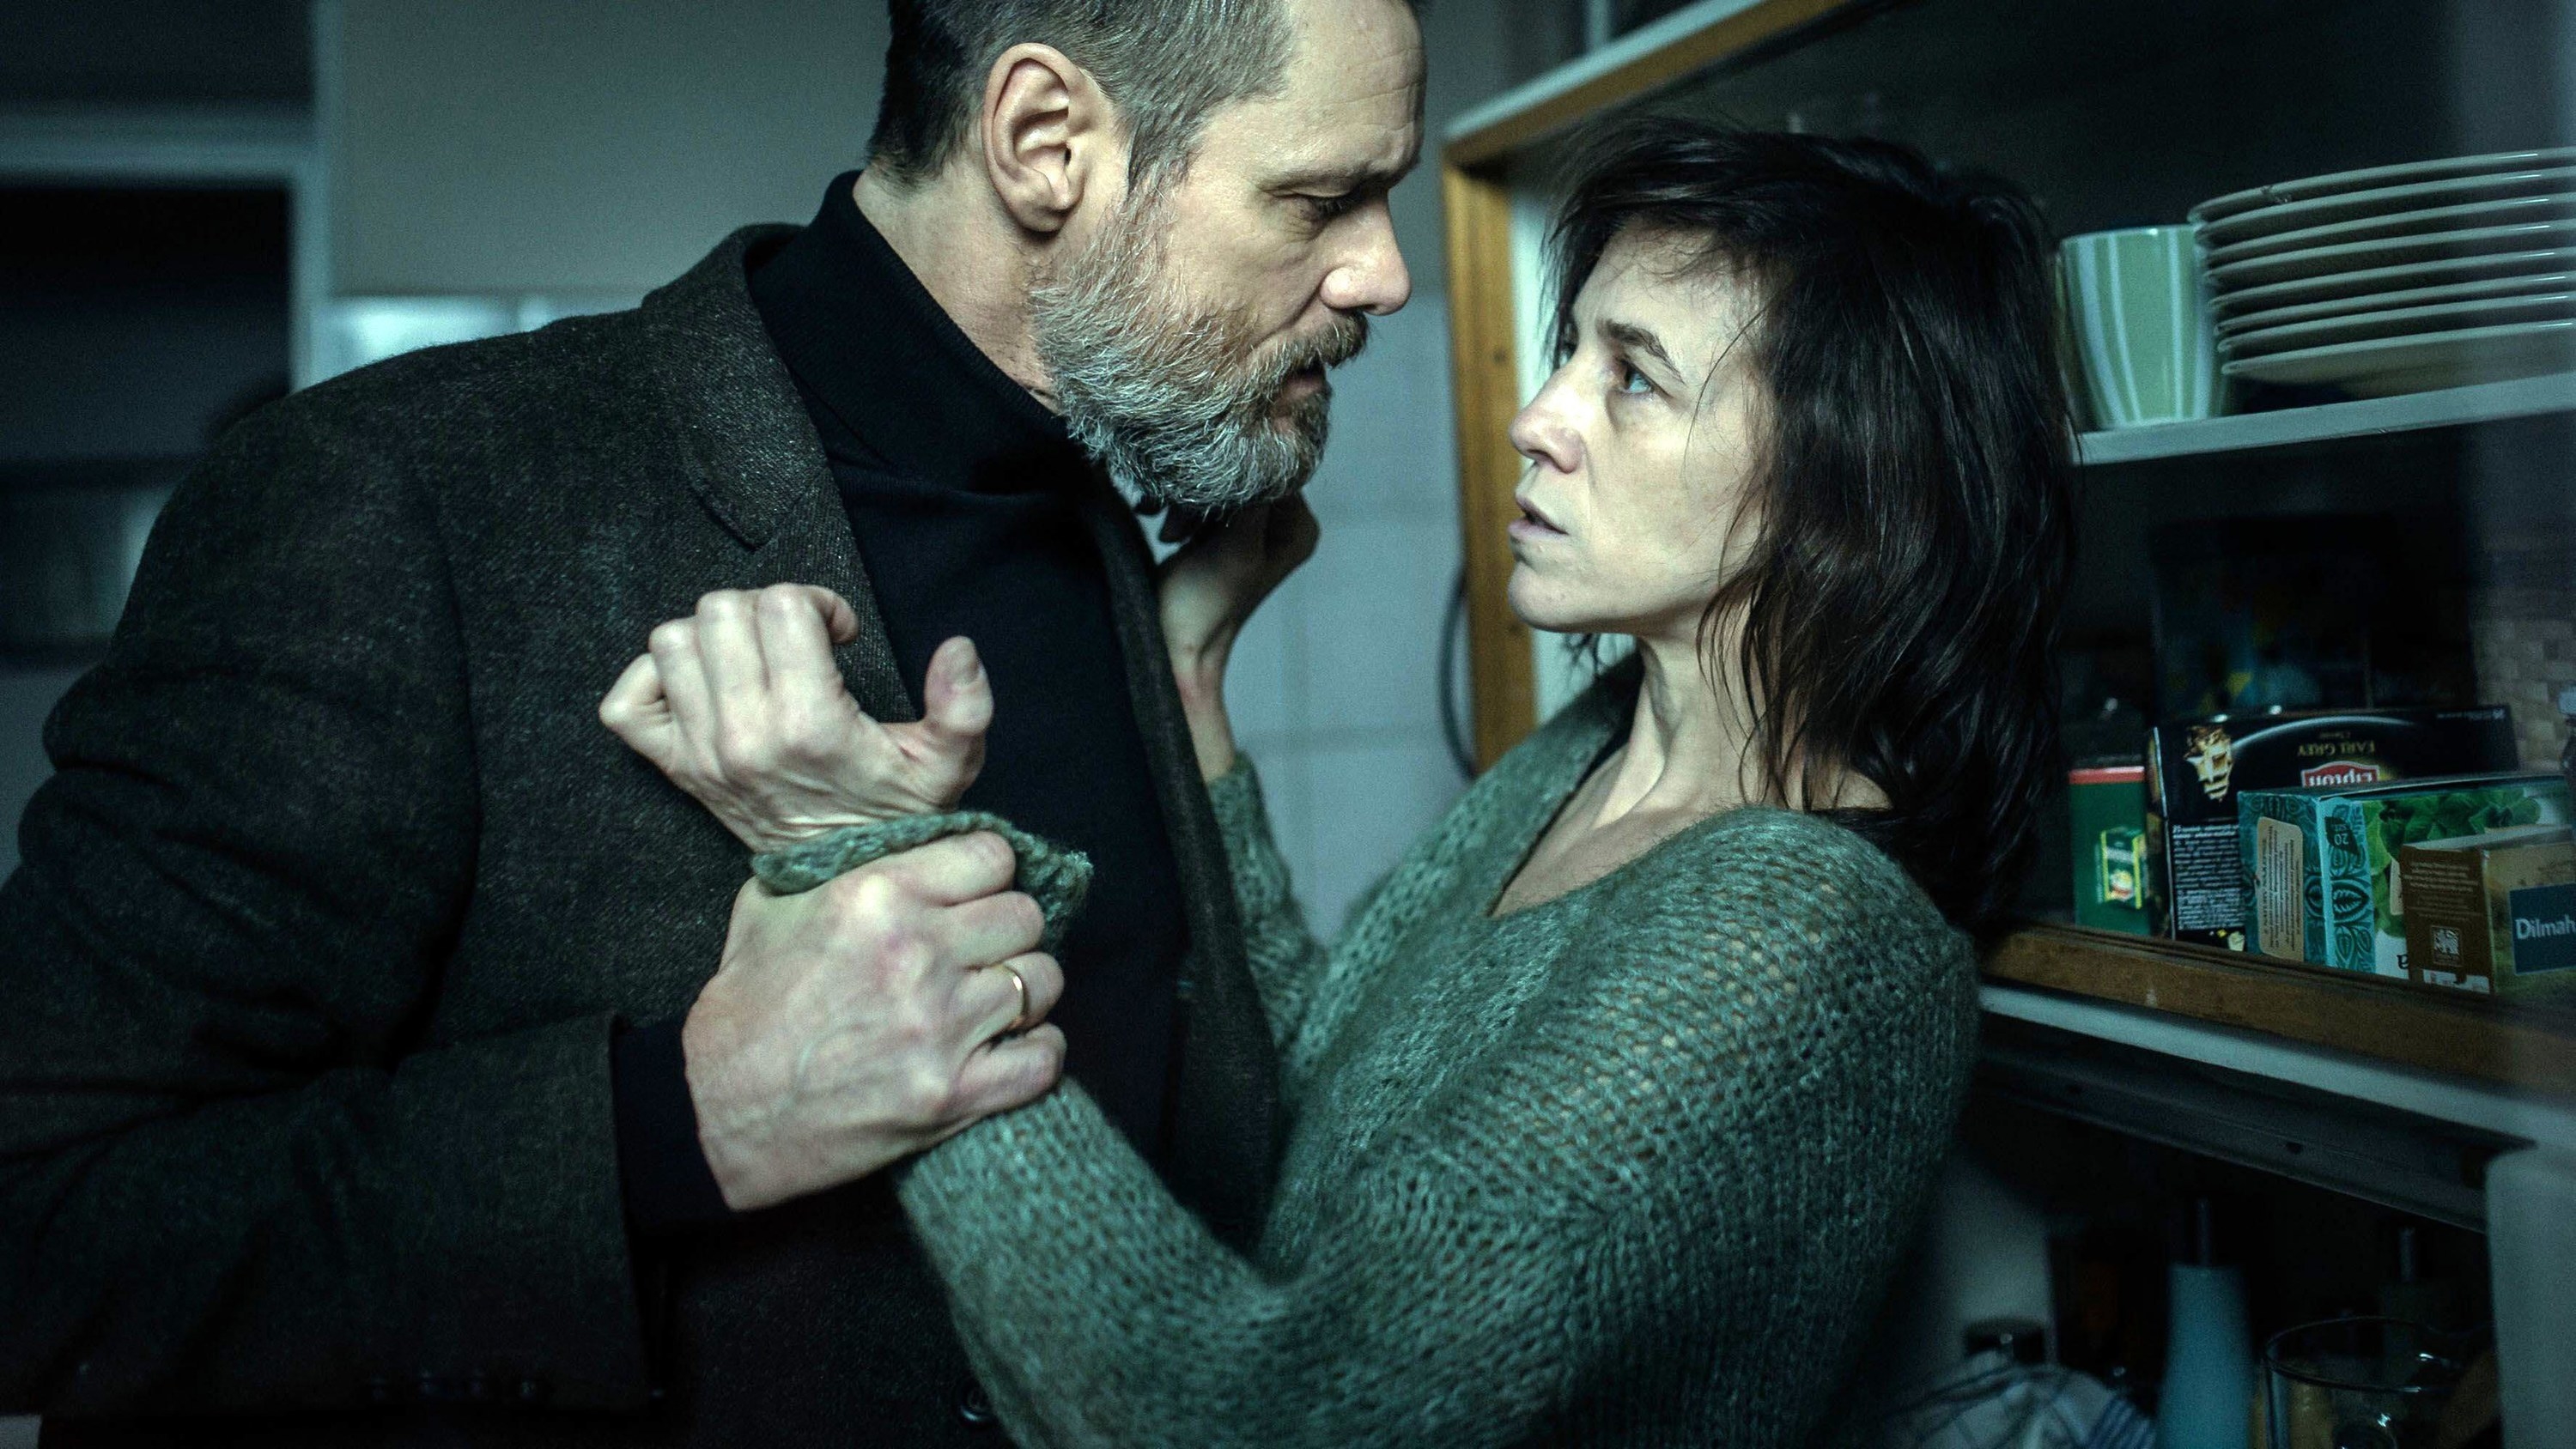 Still from the movie &quot;Dark Crimes&quot; depicting Jim Carrey interrogating Charlotte Gainsbourg in her home